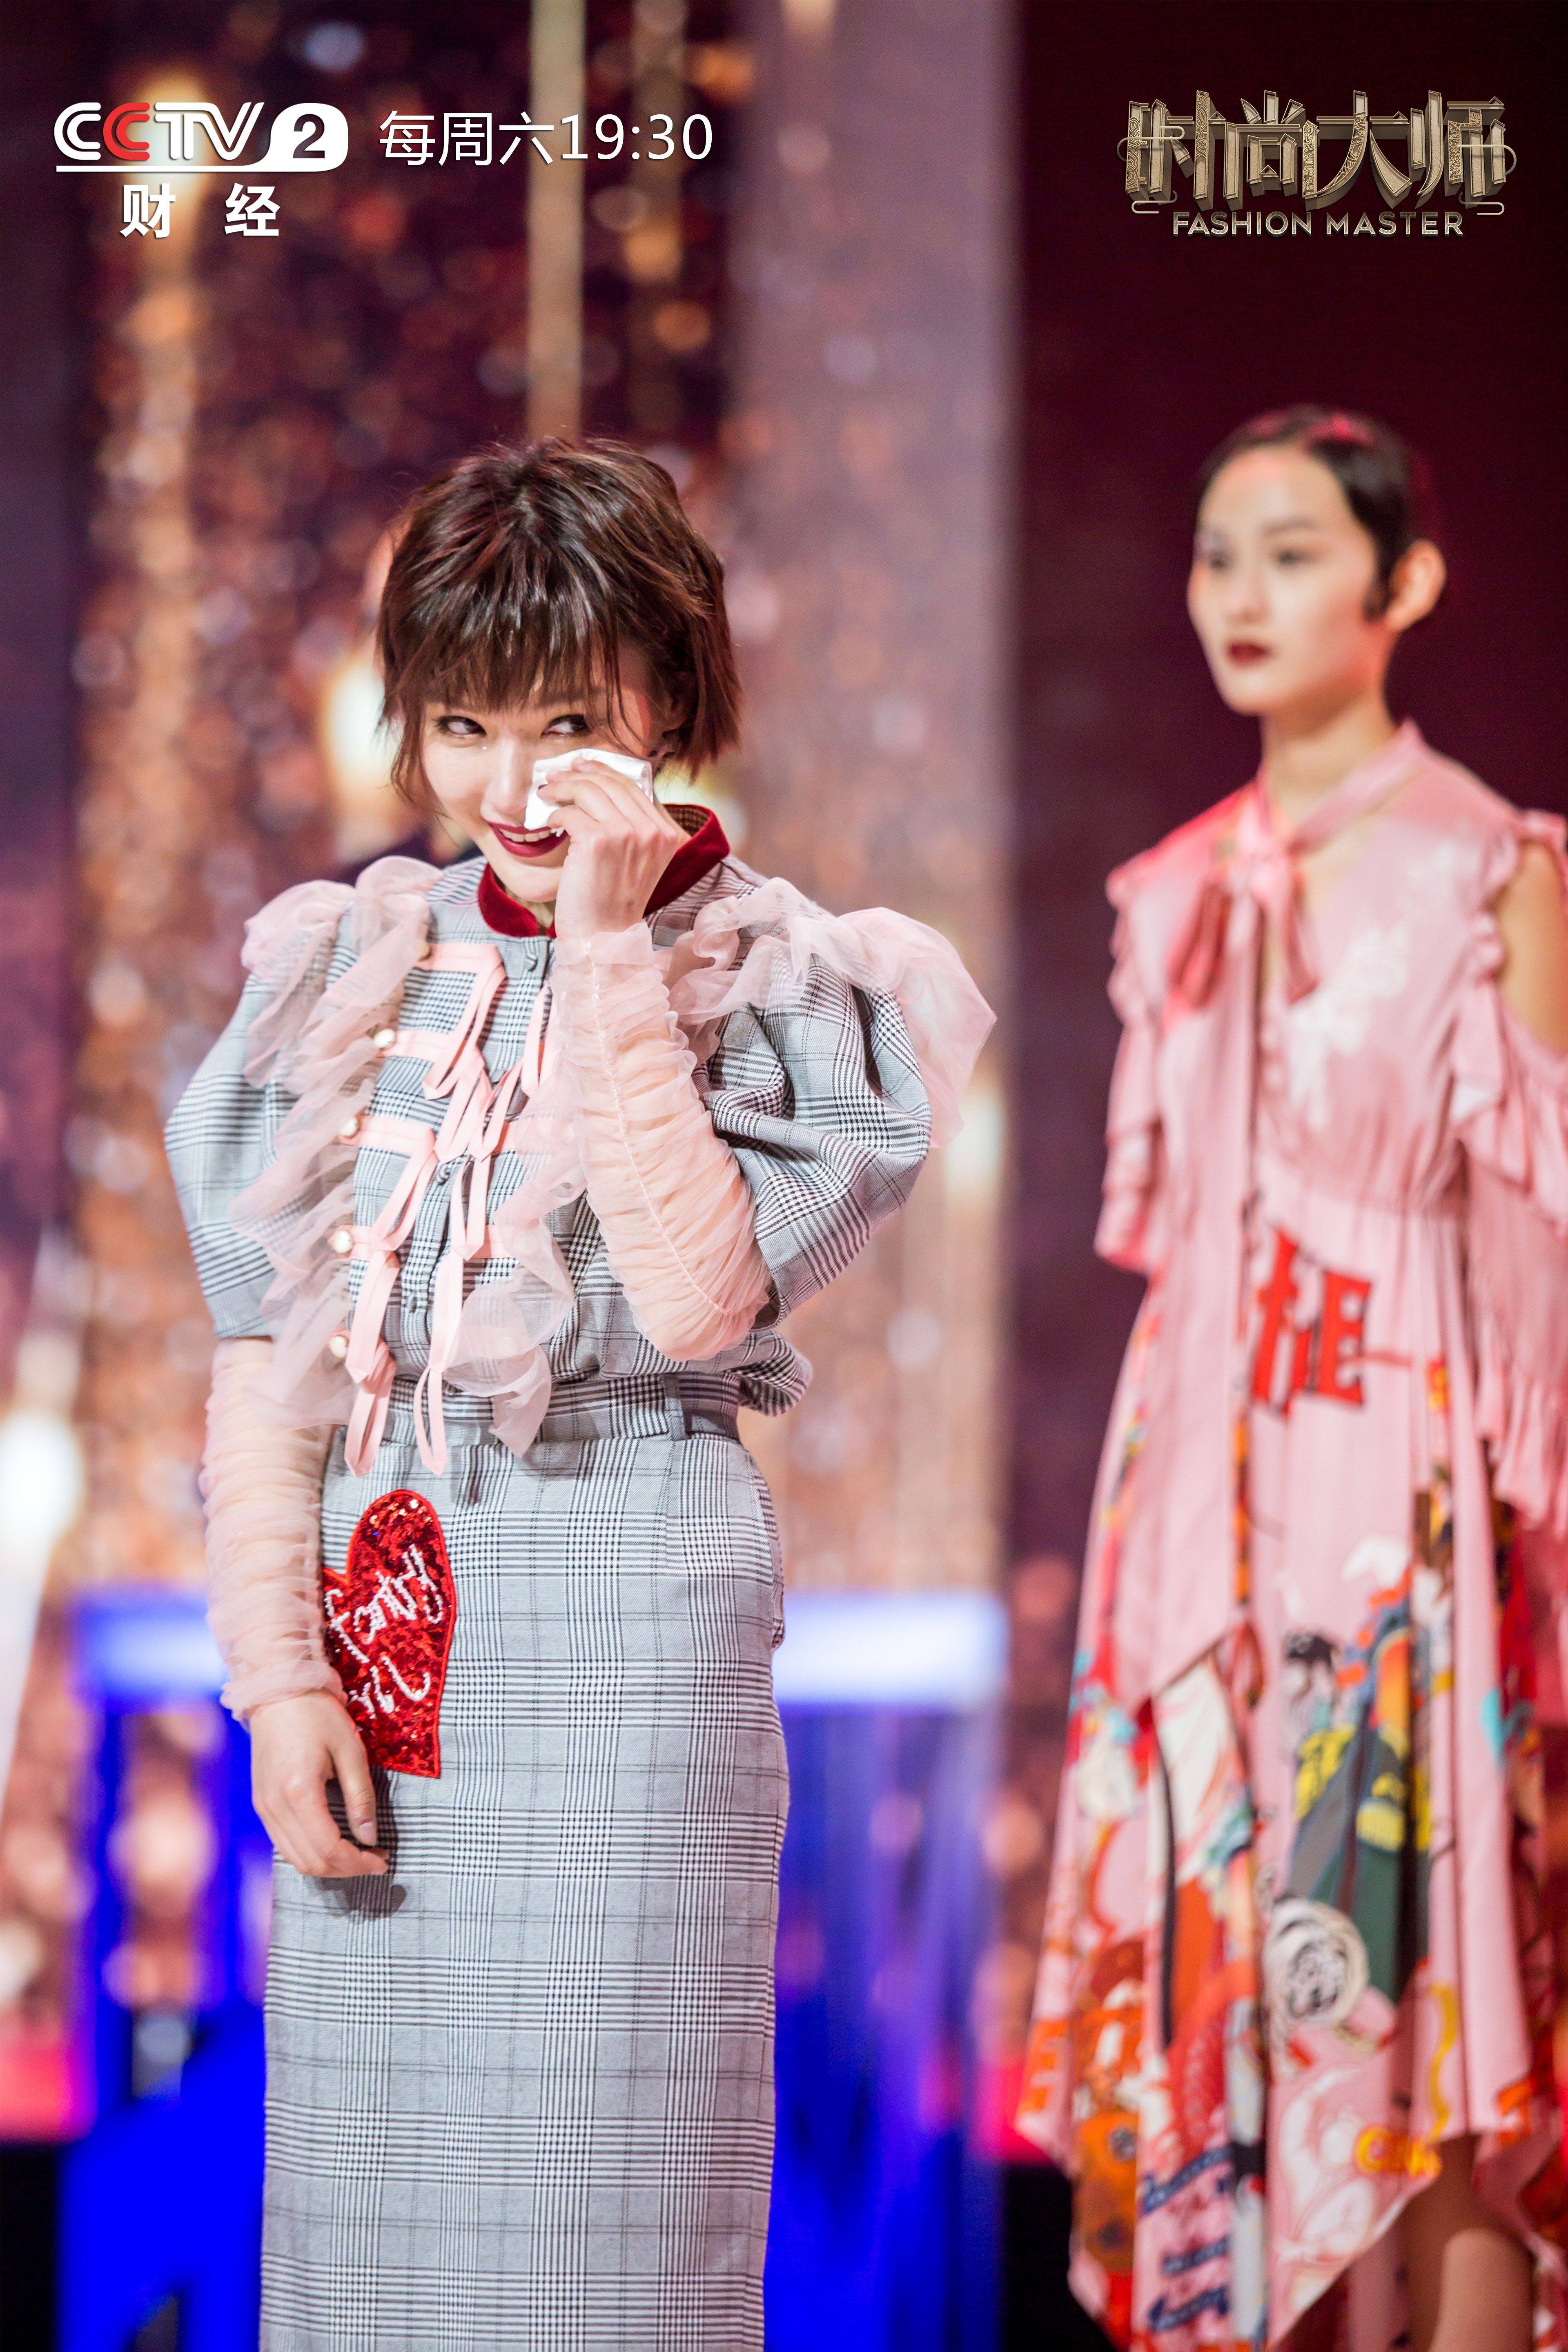 Fashion Master contestant Kate Han Wen wipes away a tear during an episode of the CCTV reality show.